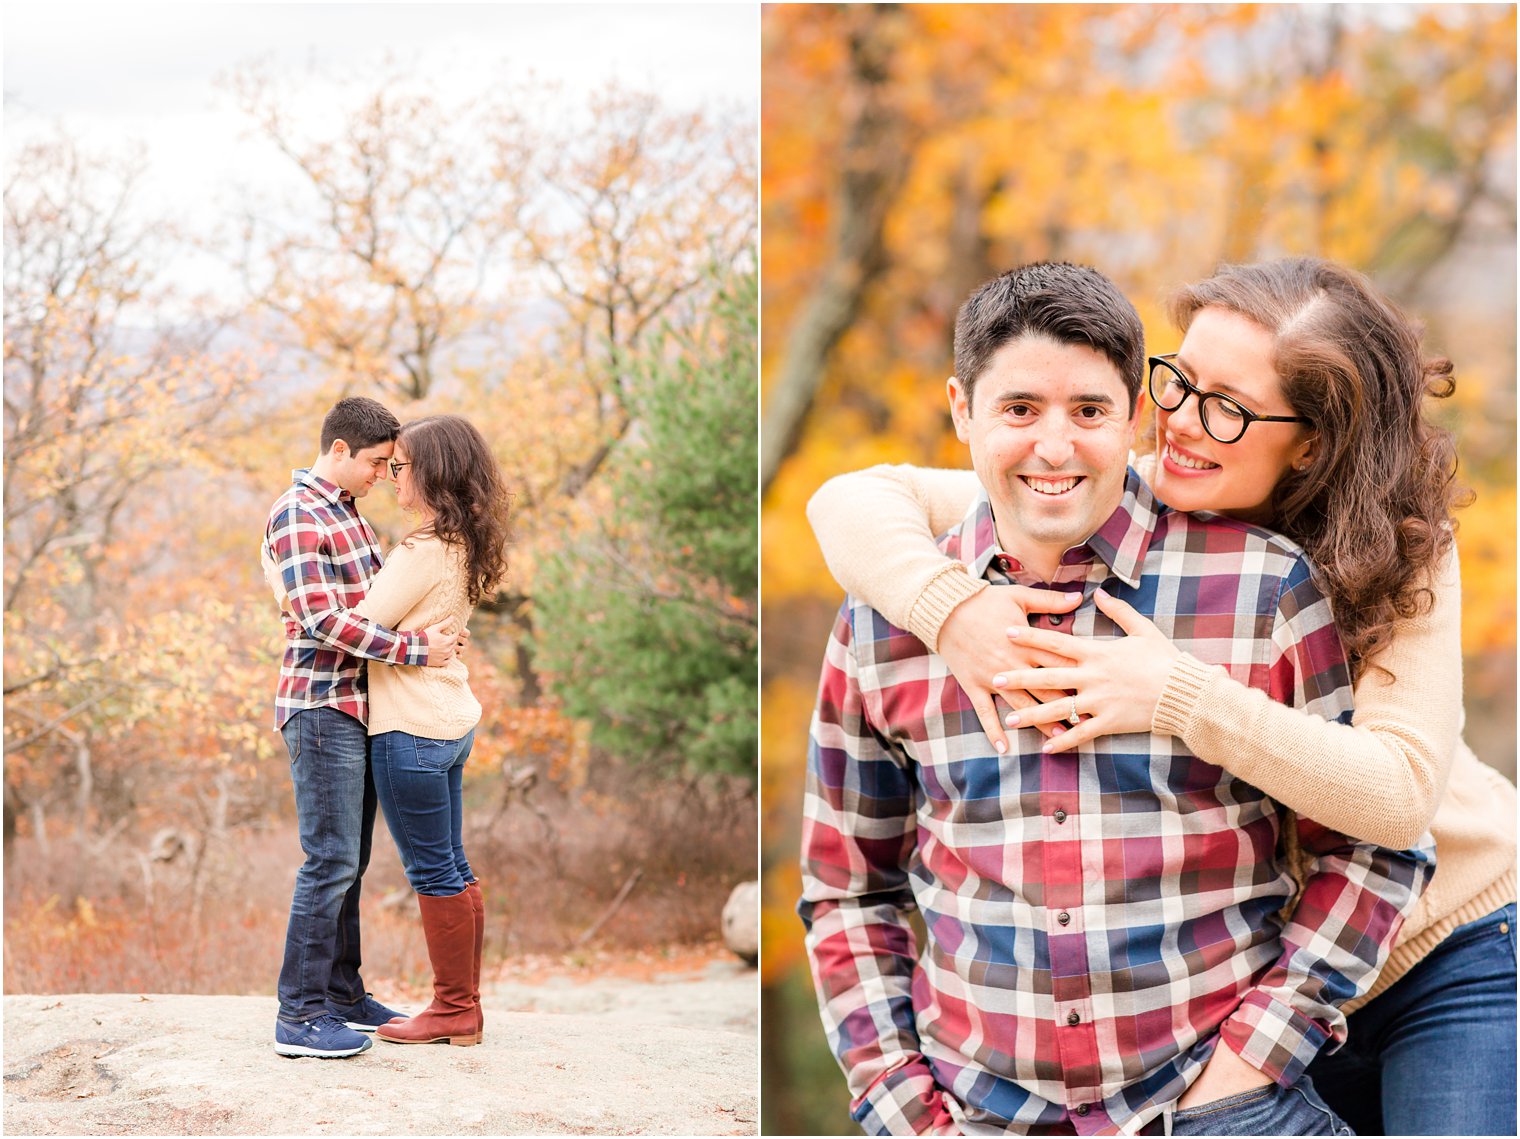 Genuine and authentic engagement photos at Bear Mountain State Park by Idalia Photography